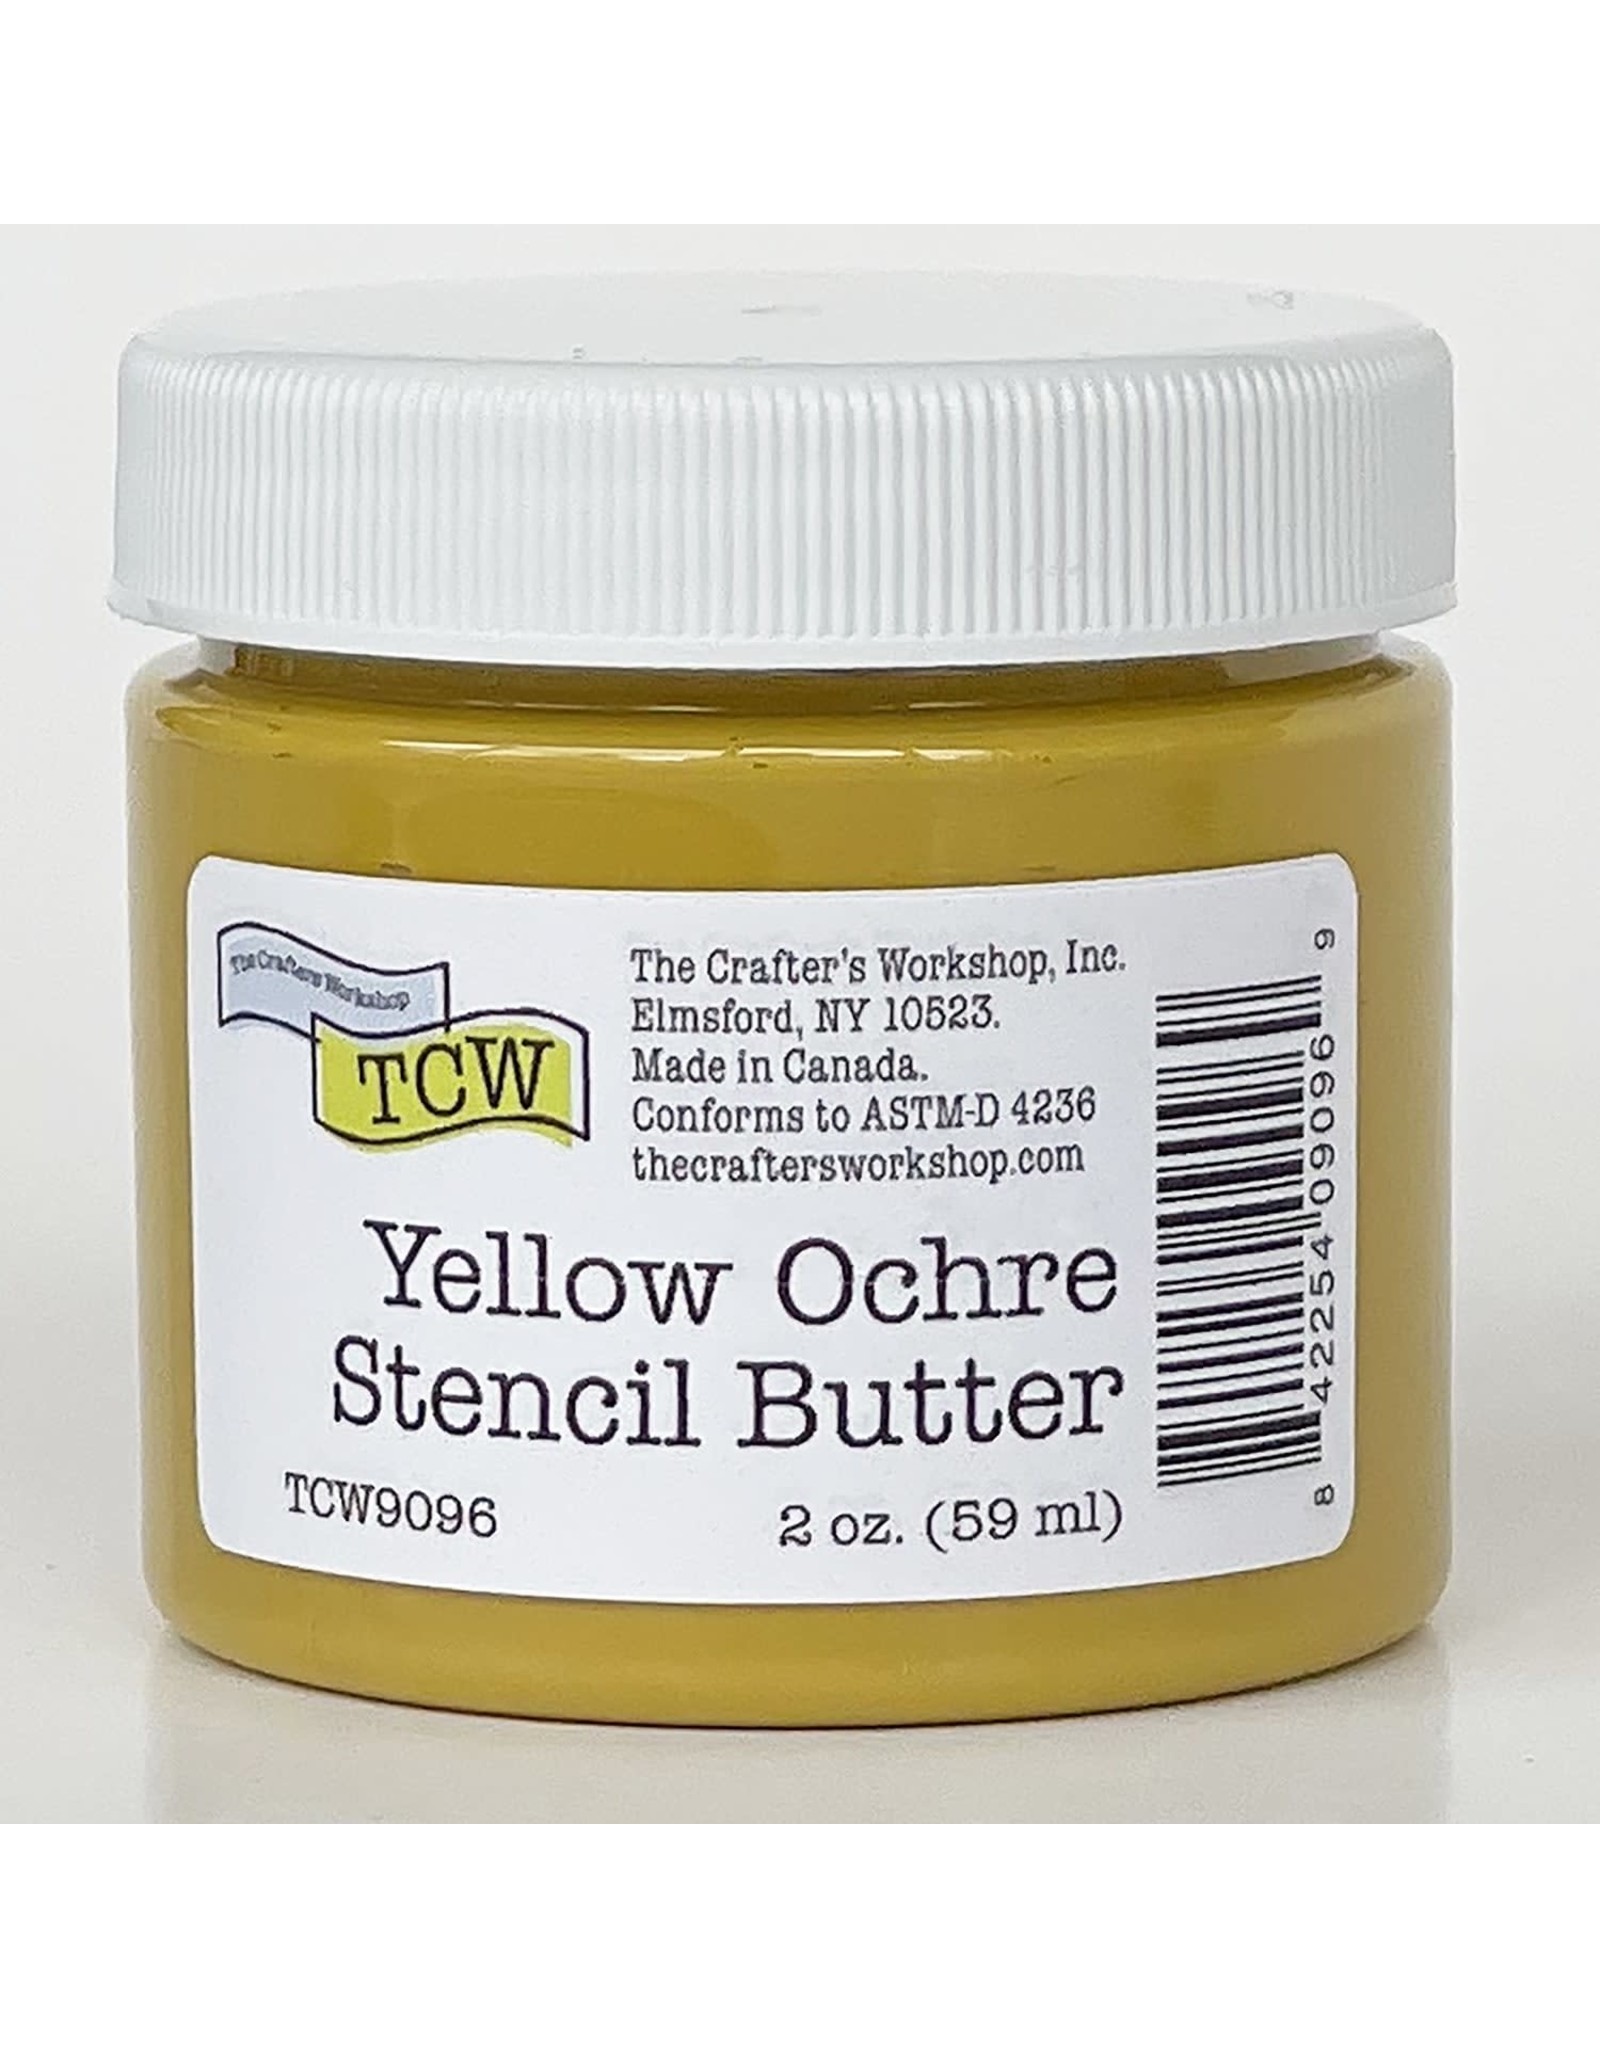 CRAFTERS WORKSHOP THE CRAFTERS WORKSHOP YELLOW OCHRE STENCIL BUTTER 2oz